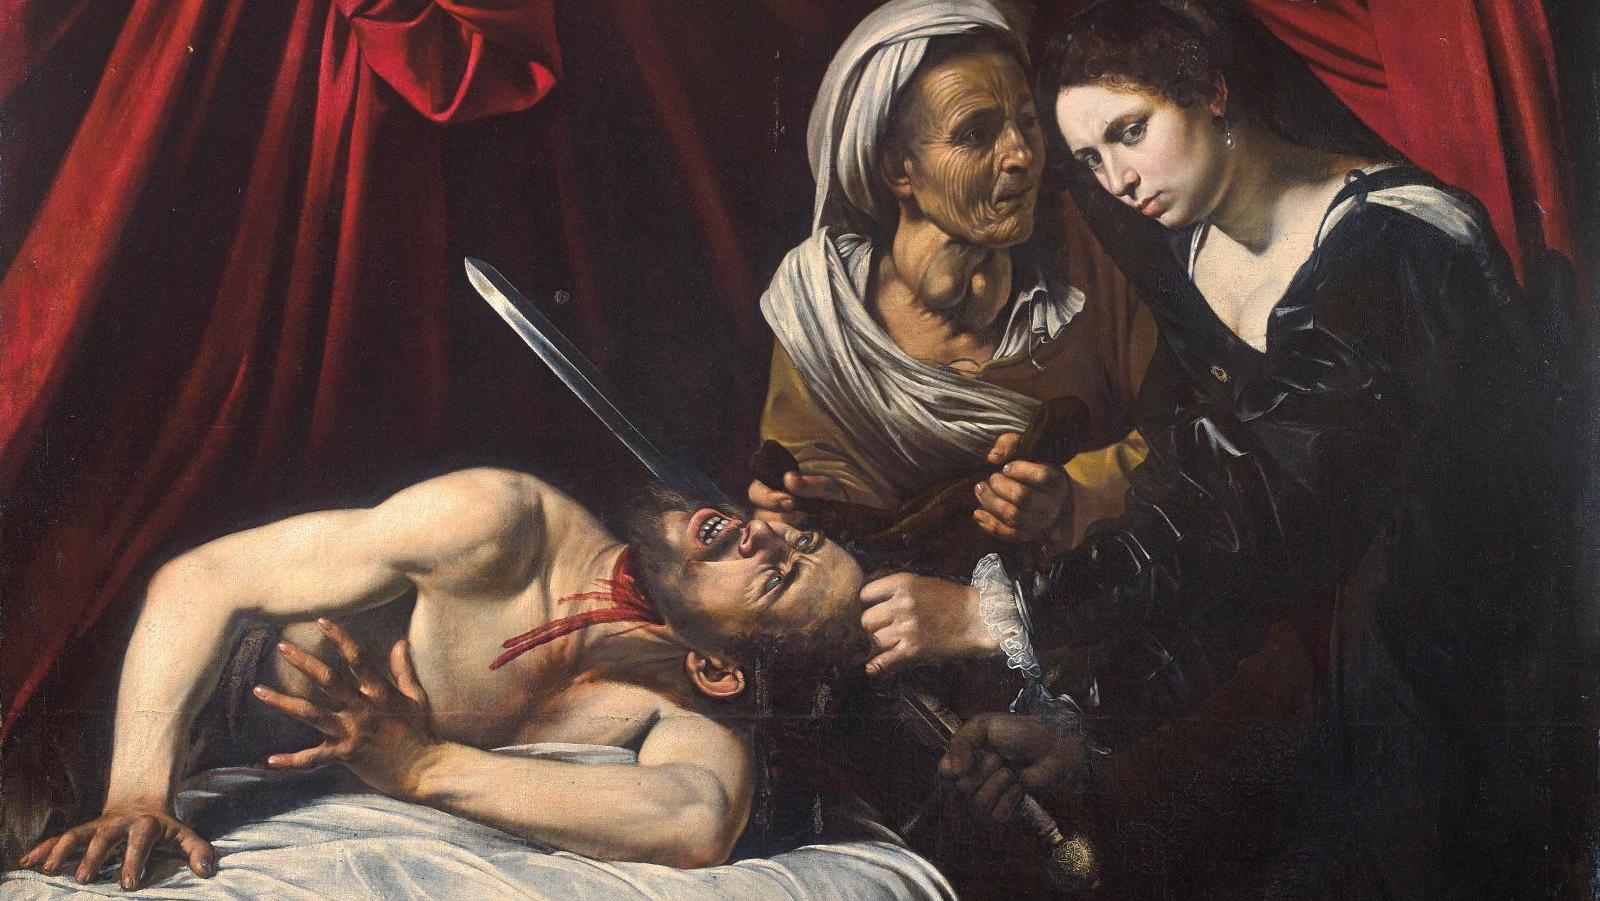 Attributed to Michelangelo Merisi, called Caravaggio (1571-1610), "Judith Cutting... ­­­­The “Judith”: The Jury is Still Out